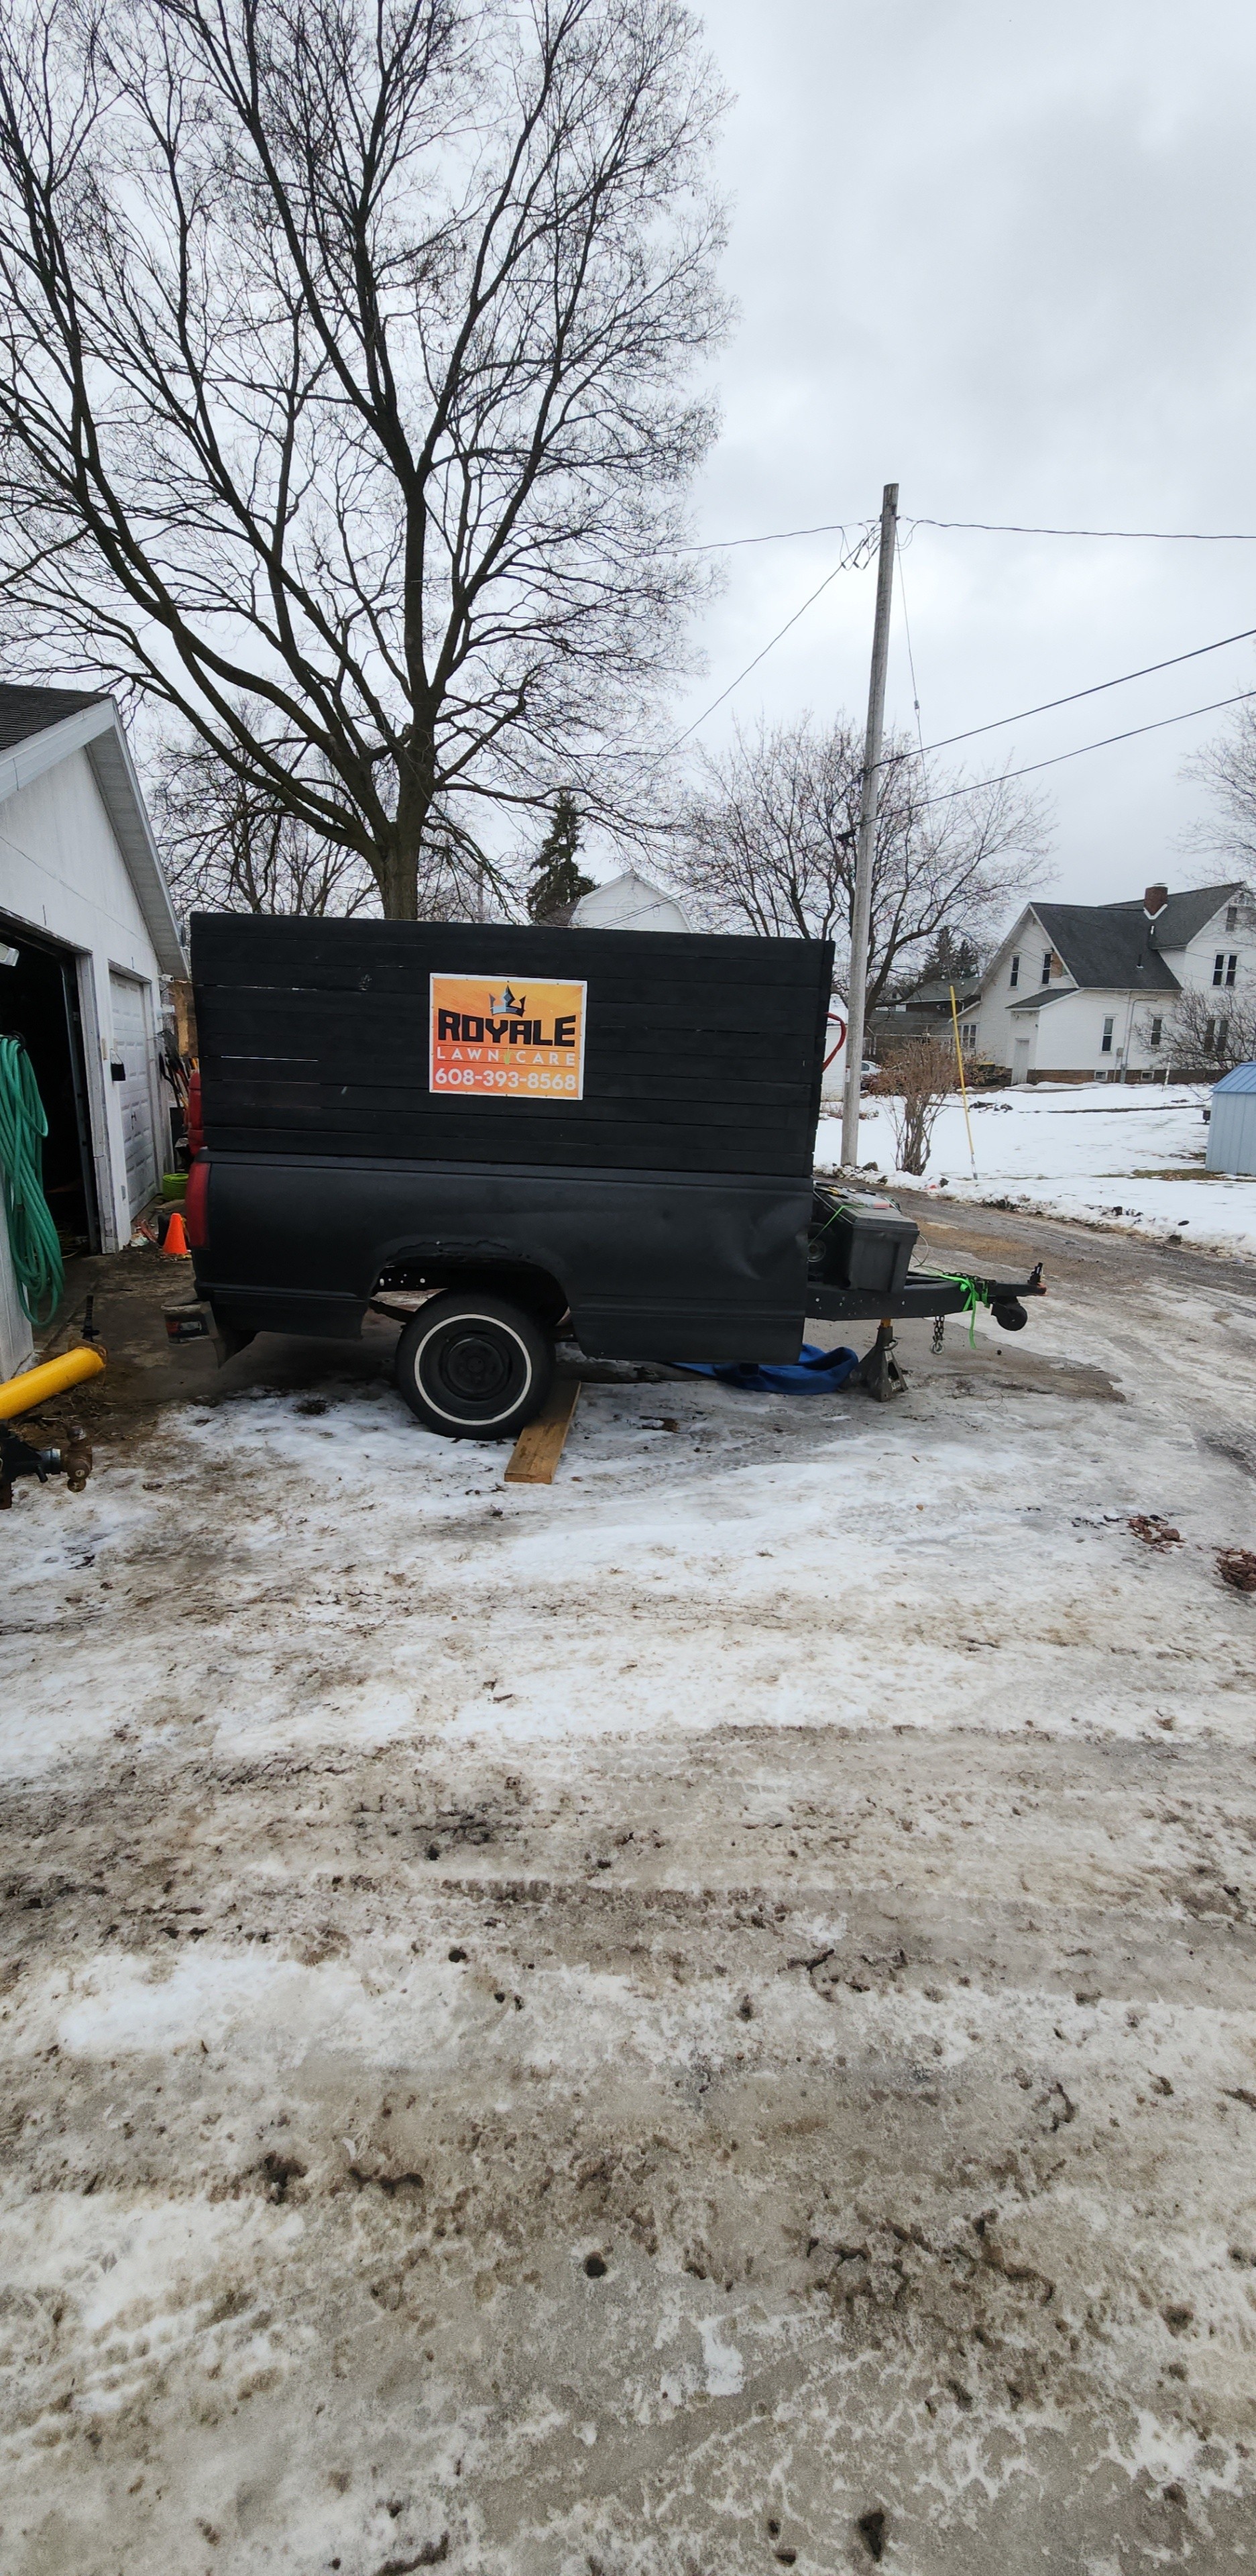 Dumpster Rental for Royale Lawn Care and Maintenance LLC in Reedsburg, WI